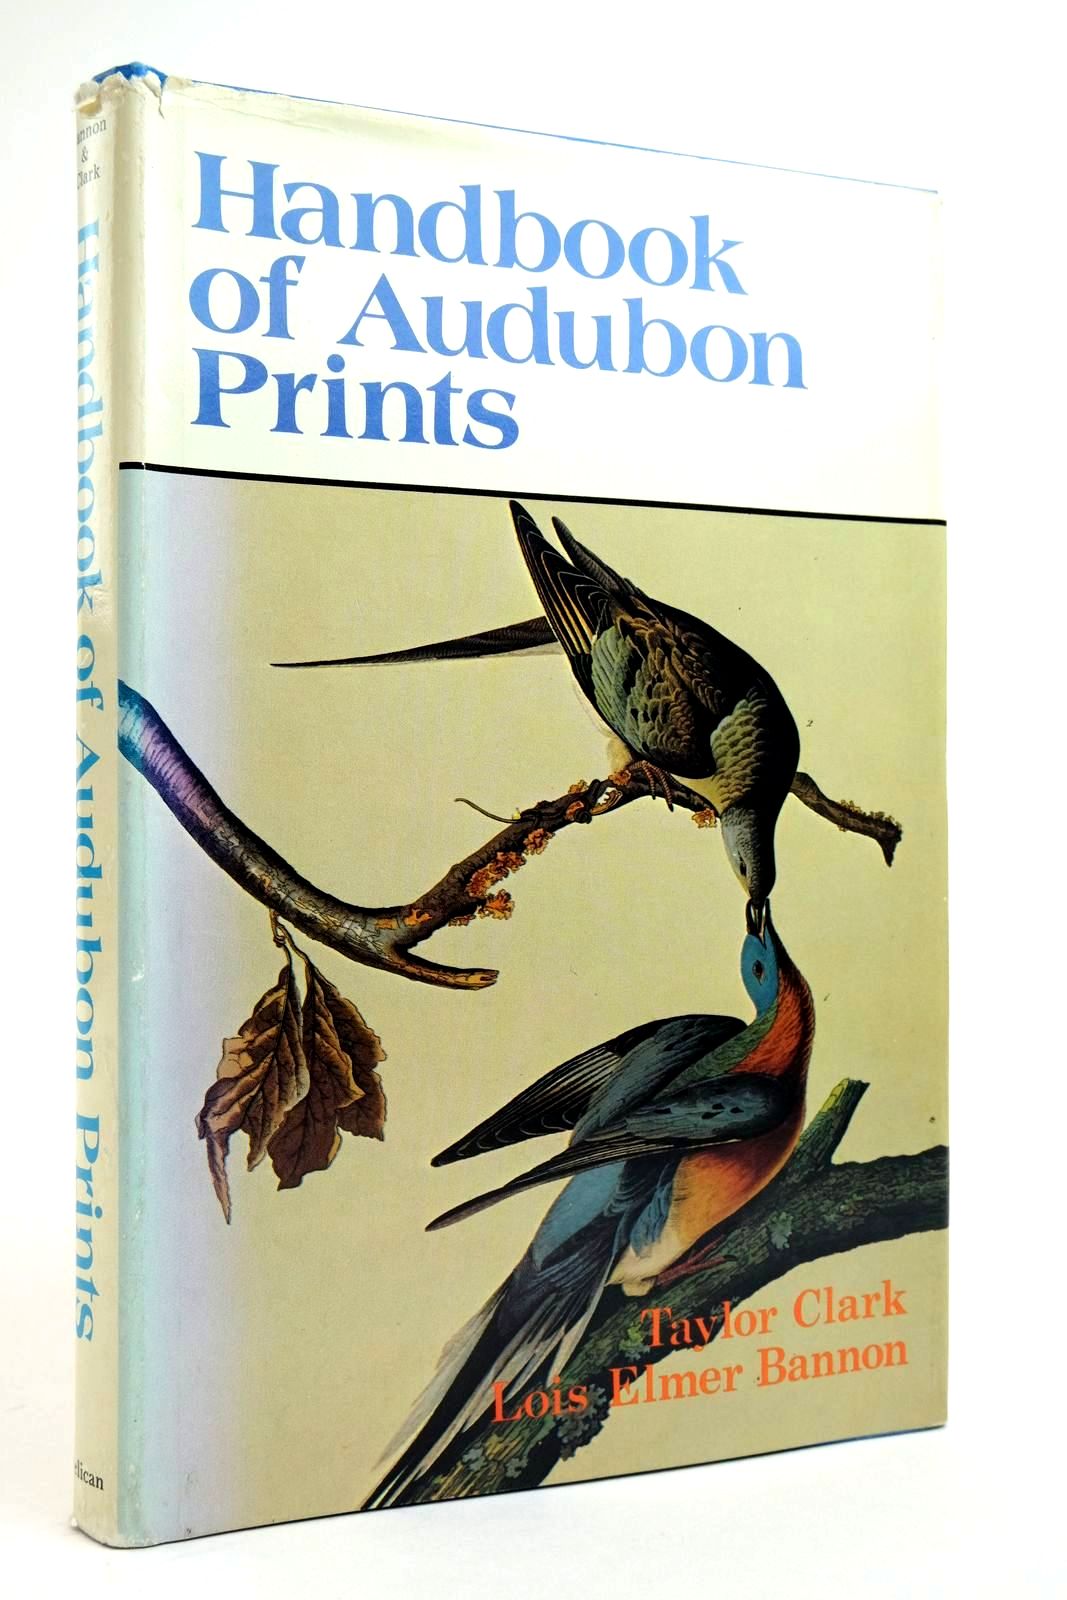 Photo of HANDBOOK OF AUDUBON PRINTS written by Bannon, Lois Elmer Clark, Taylor published by Pelican Publishing (STOCK CODE: 2135513)  for sale by Stella & Rose's Books